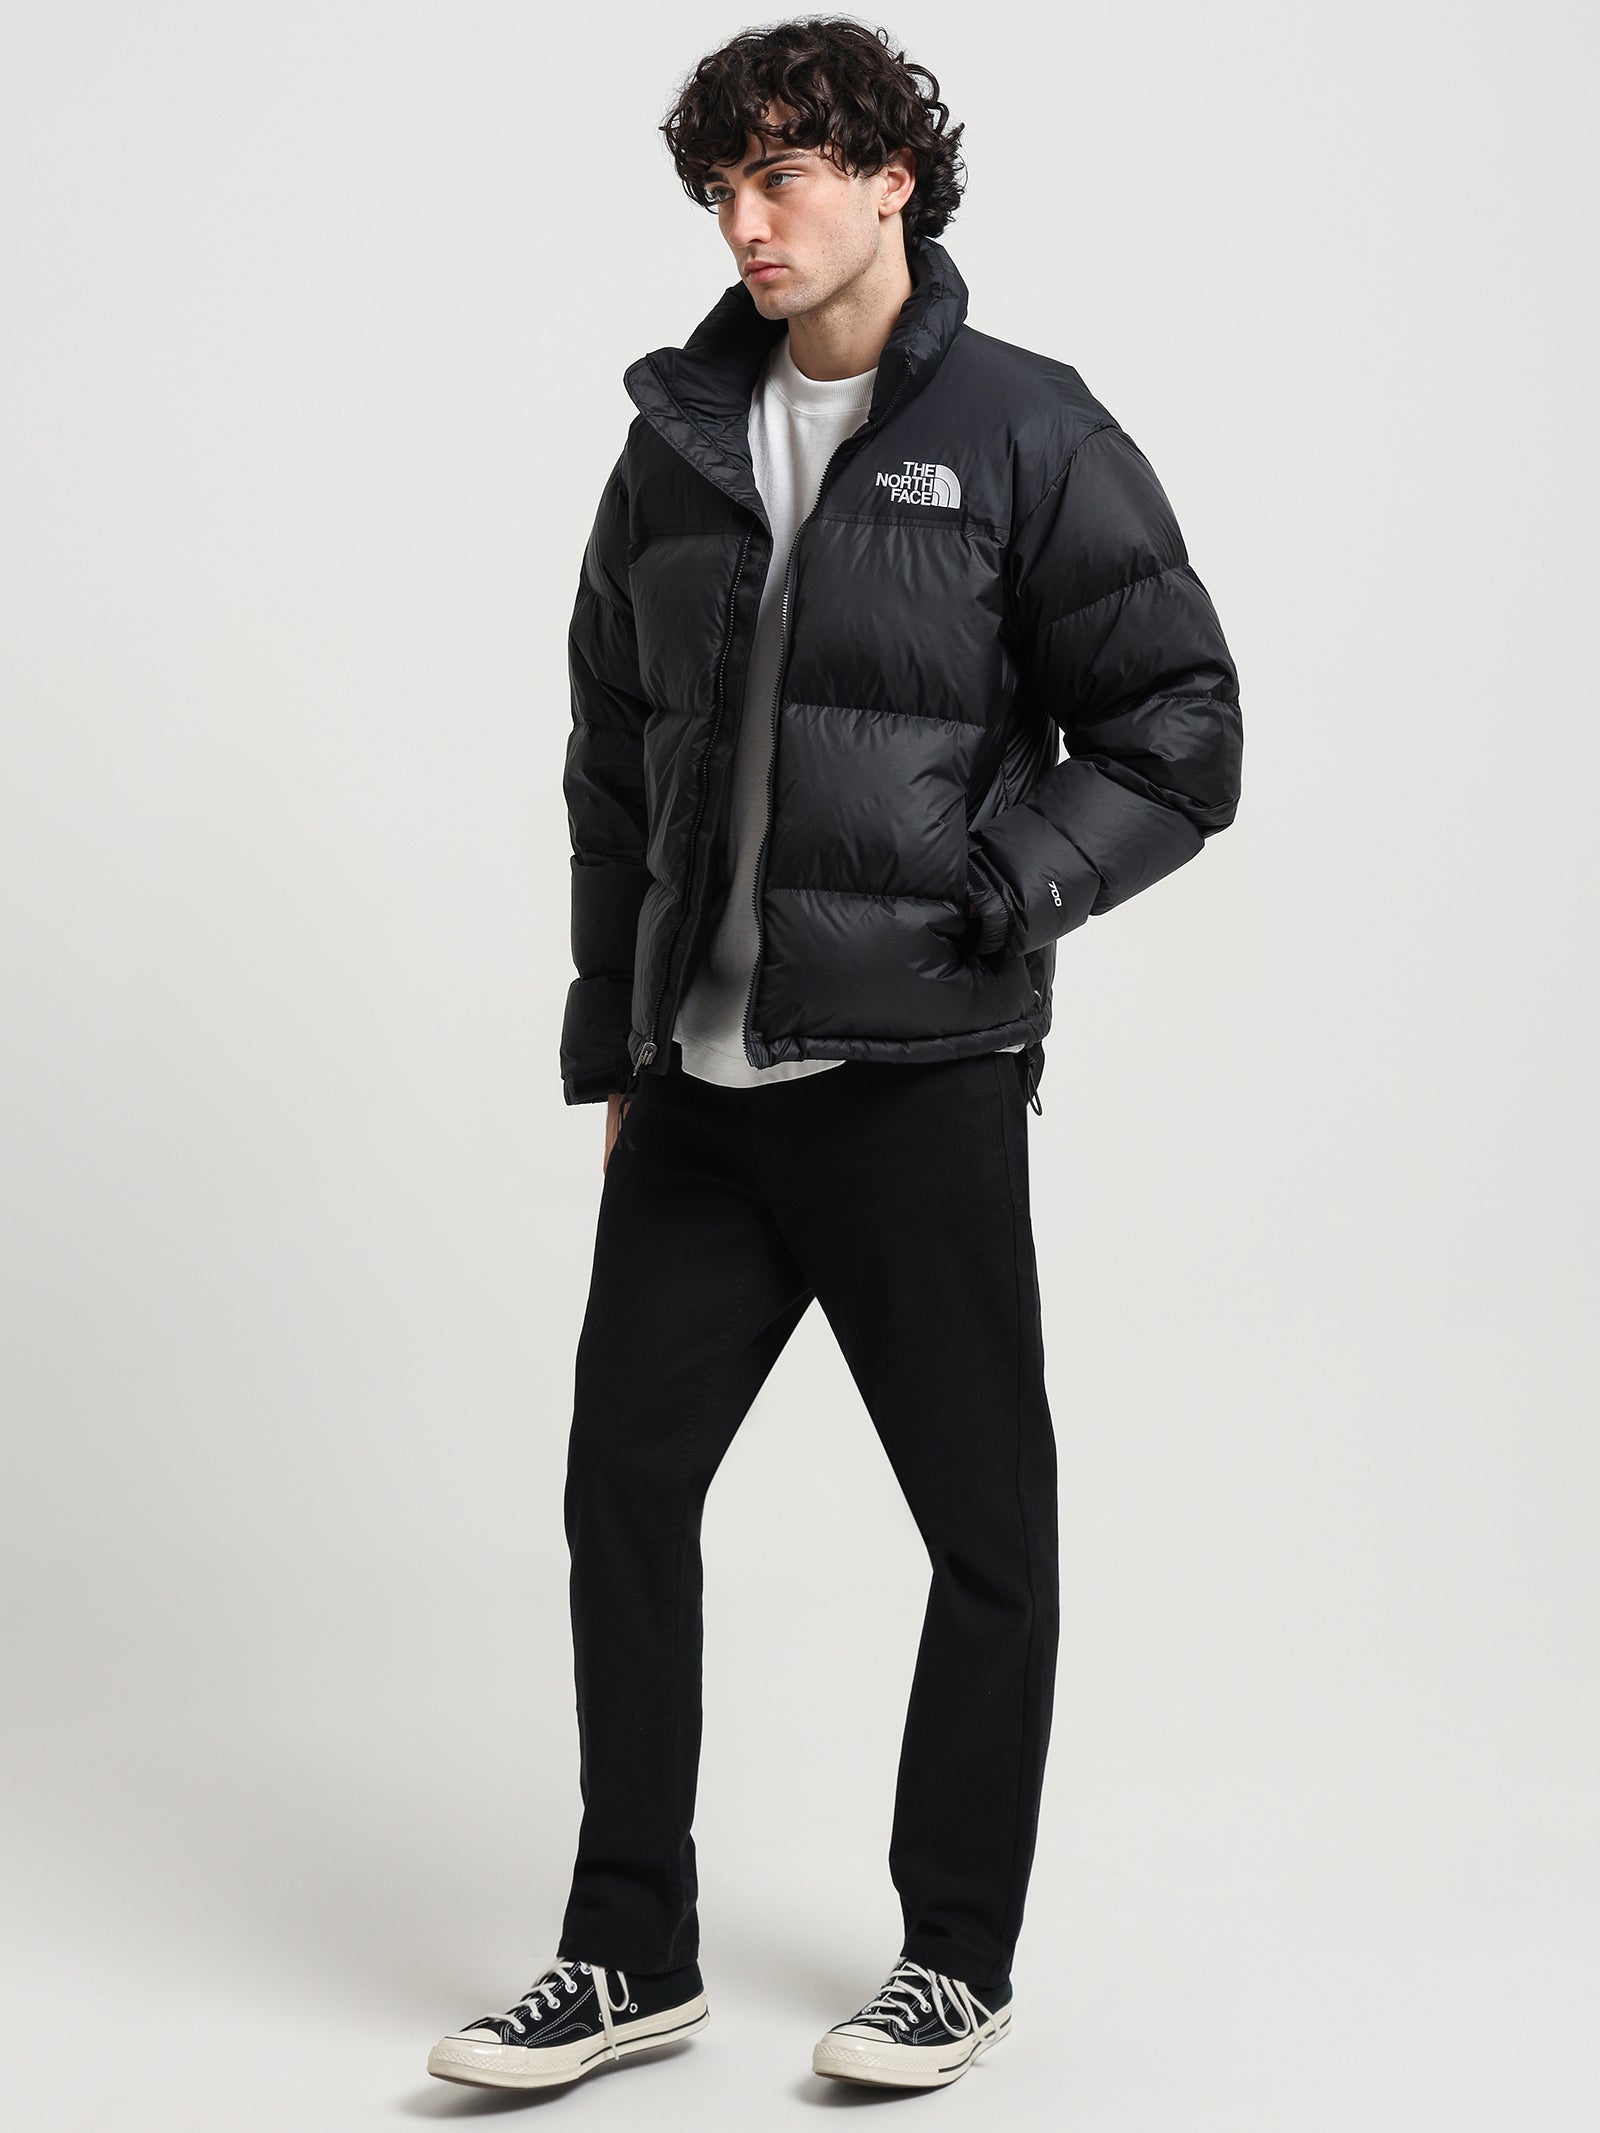 The North Face Puffer Jacket Outfit Men  North face jacket outfit, North  face jacket mens, Puffer jacket outfit men